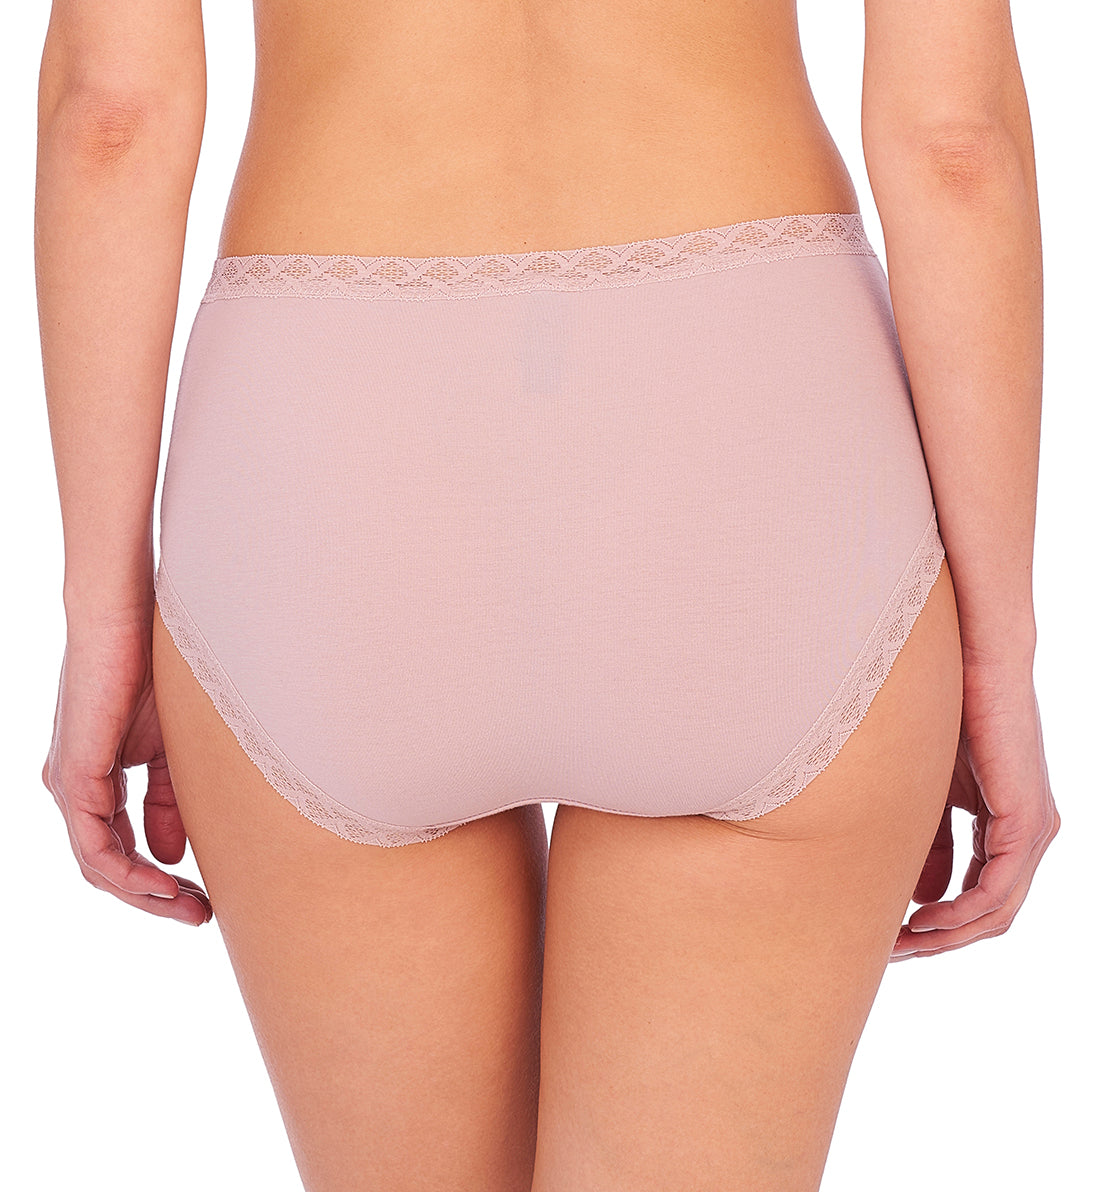 Natori Bliss Full Brief Panty (755058),Small,Rose Beige - Rose Beige,Small